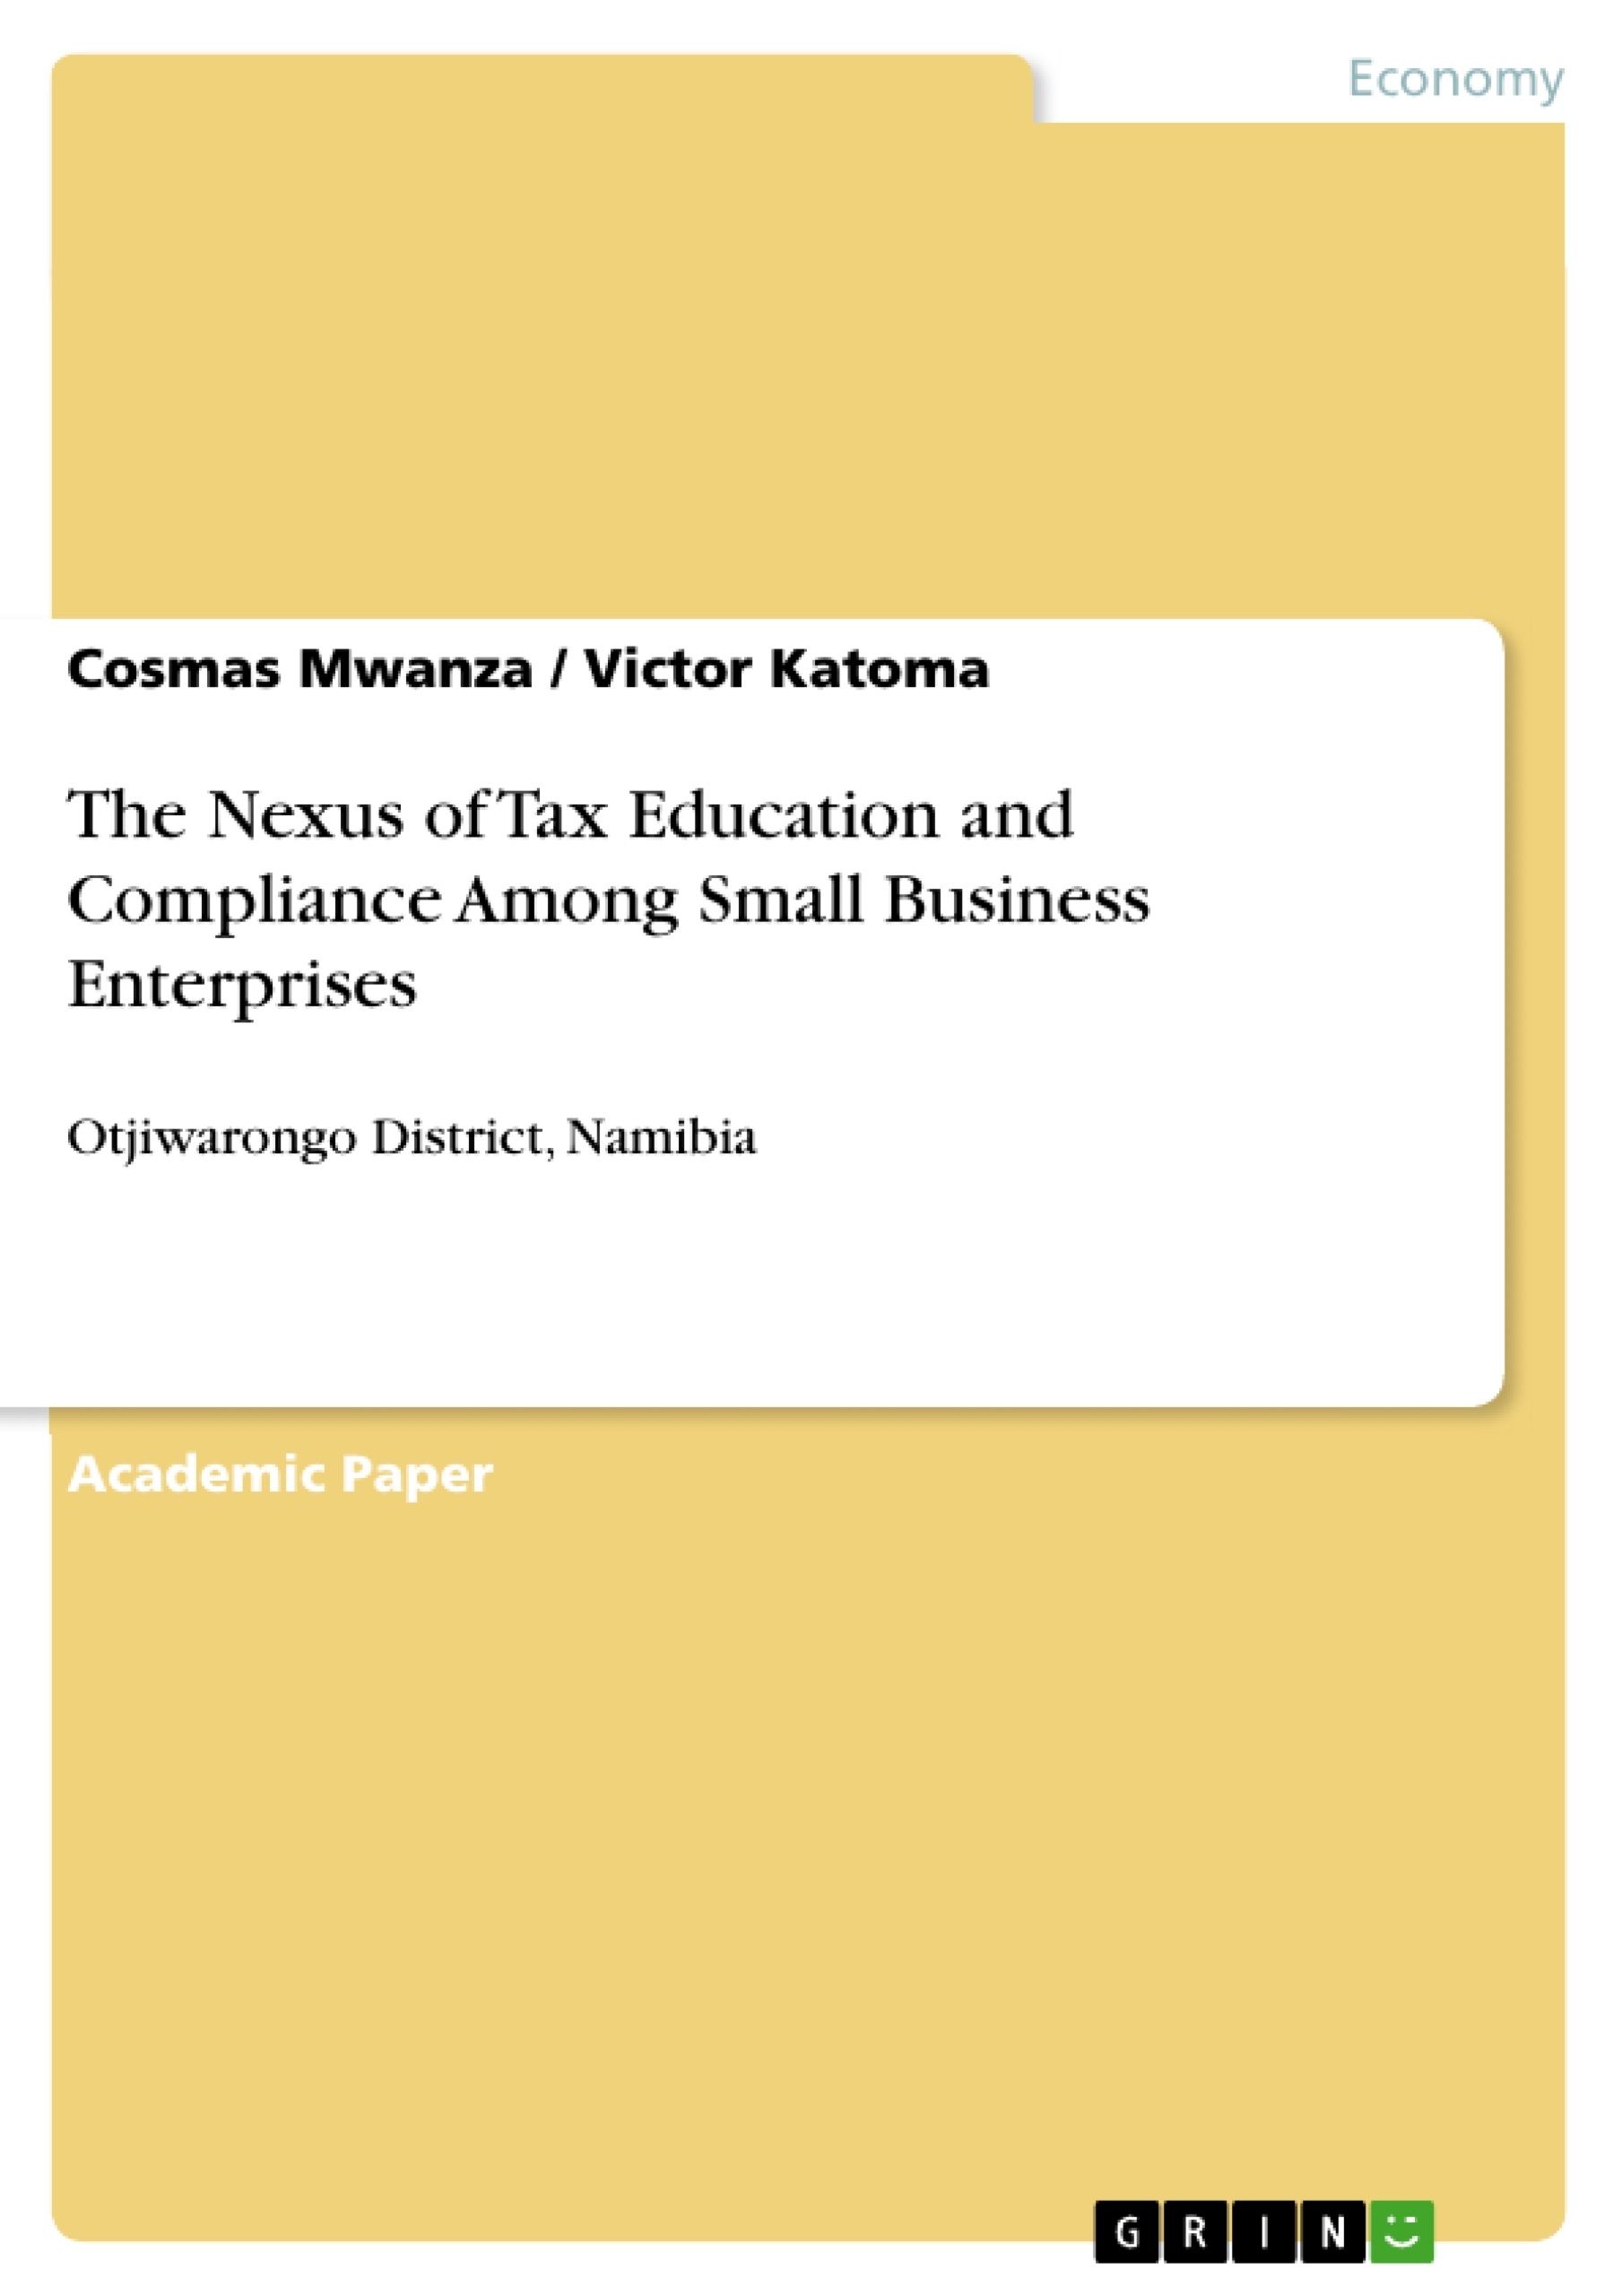 Título: The Nexus of Tax Education and Compliance Among Small Business Enterprises